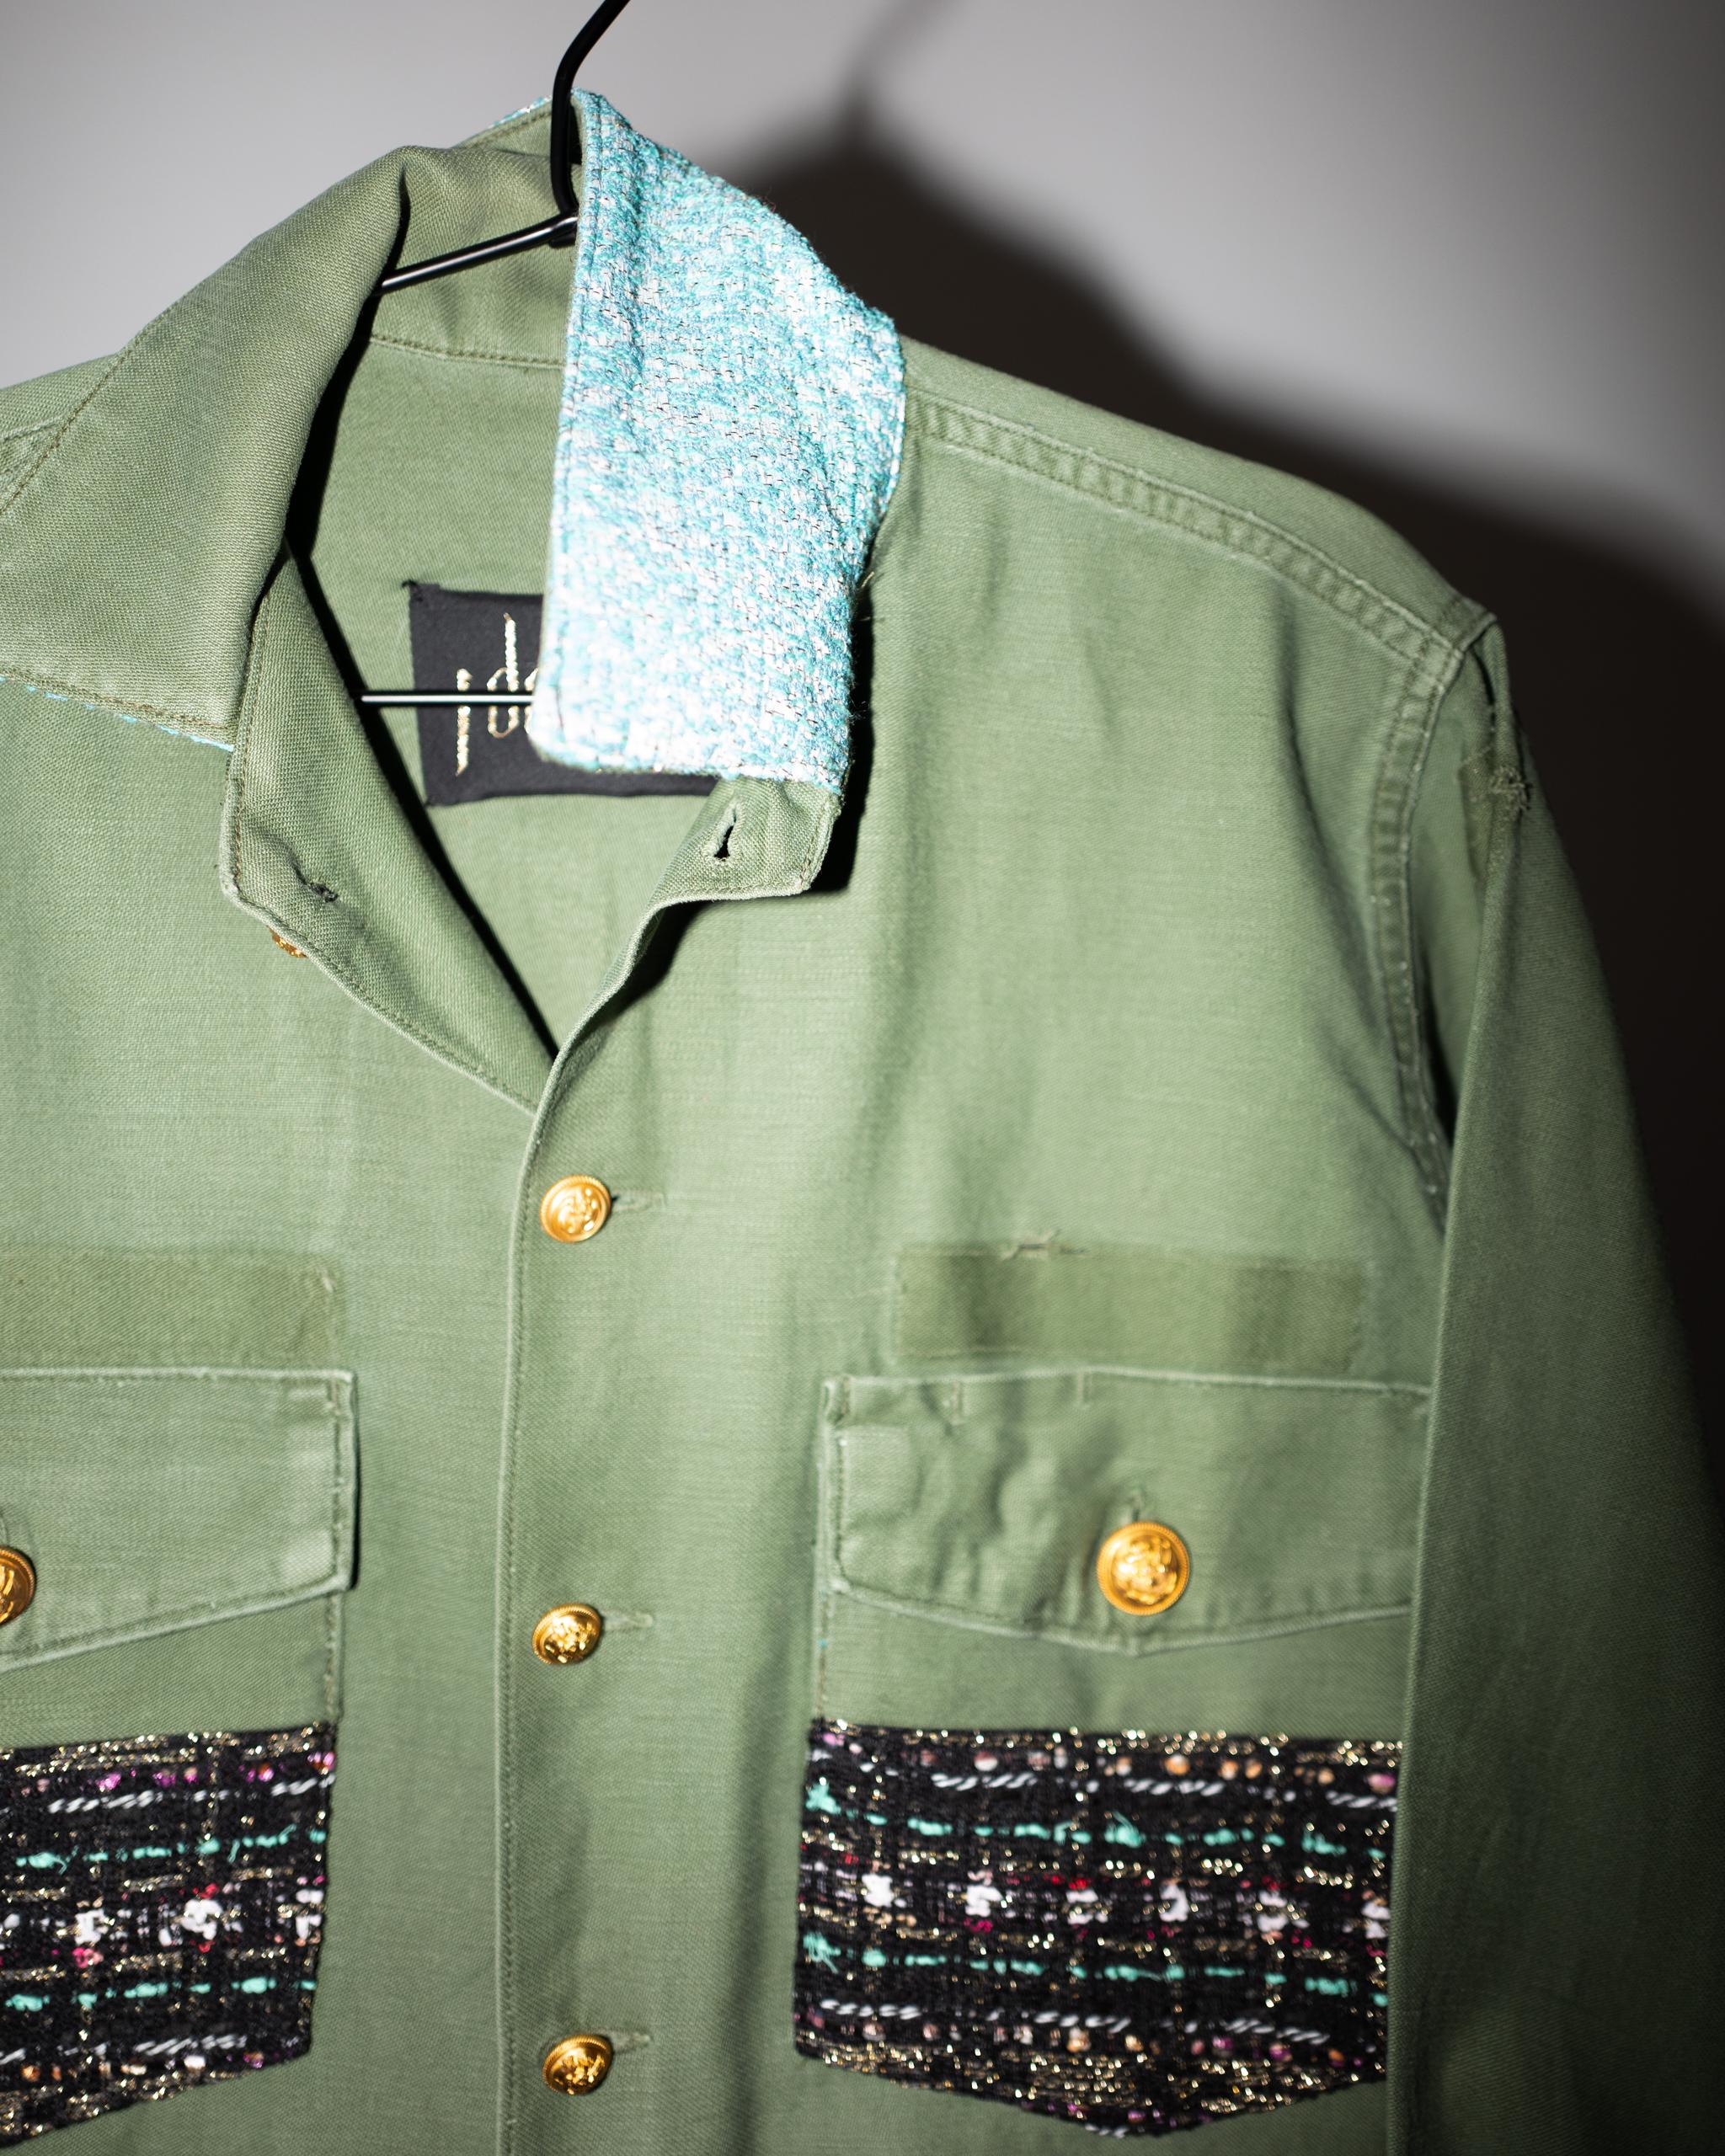 Black Lurex Tweed Pastel Green Collar Vintage GreenMilitary Jacket Gold Buttons For Sale 2